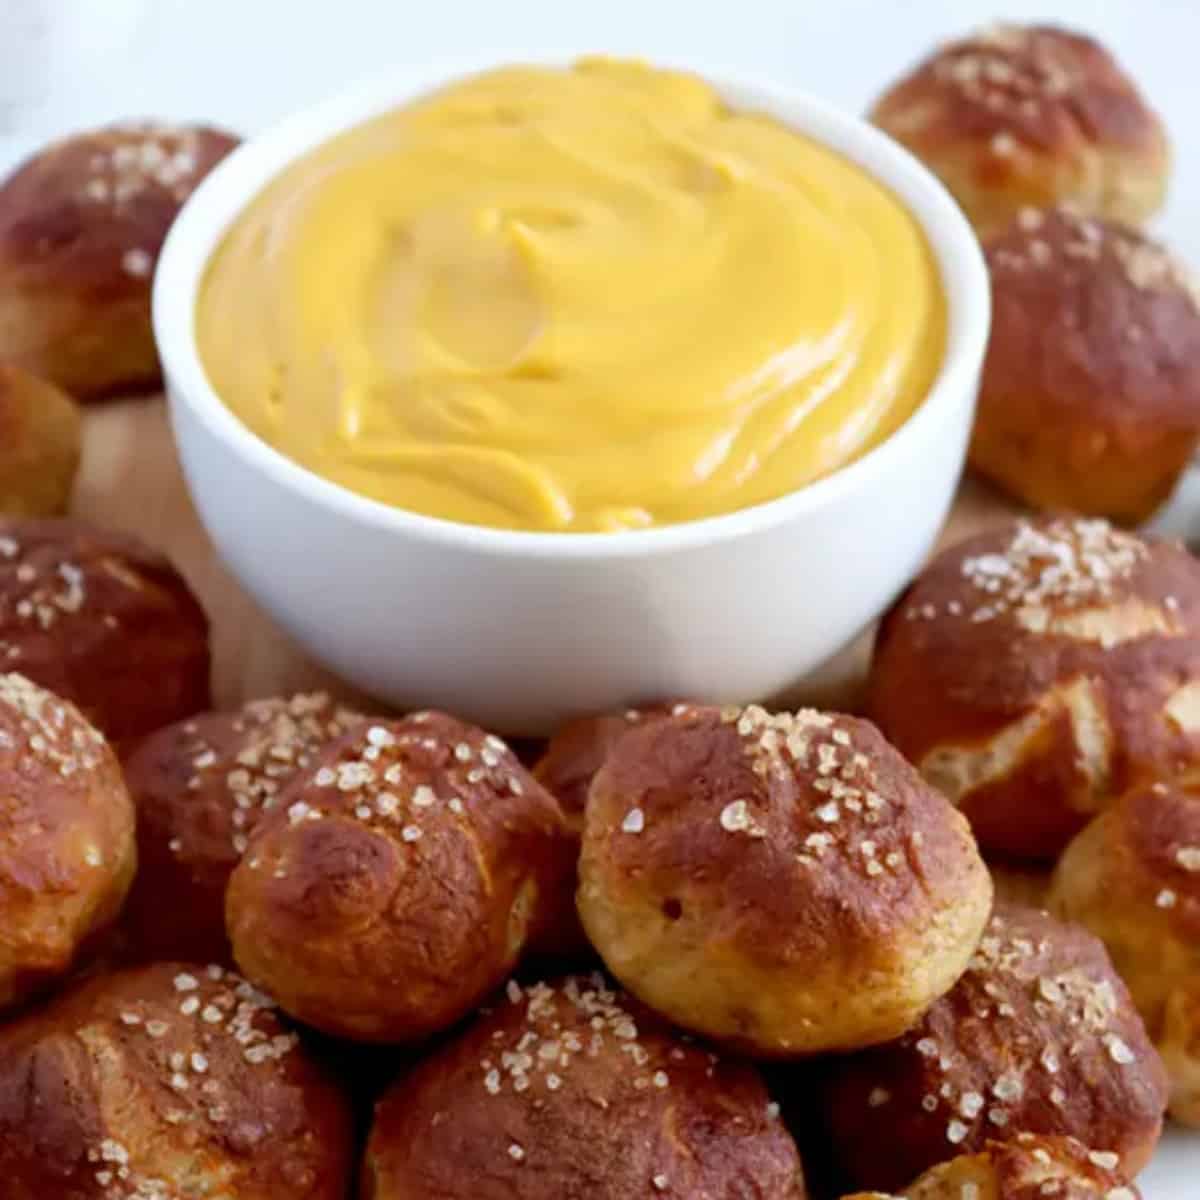 pretzel bites with cheese dipping sauce.